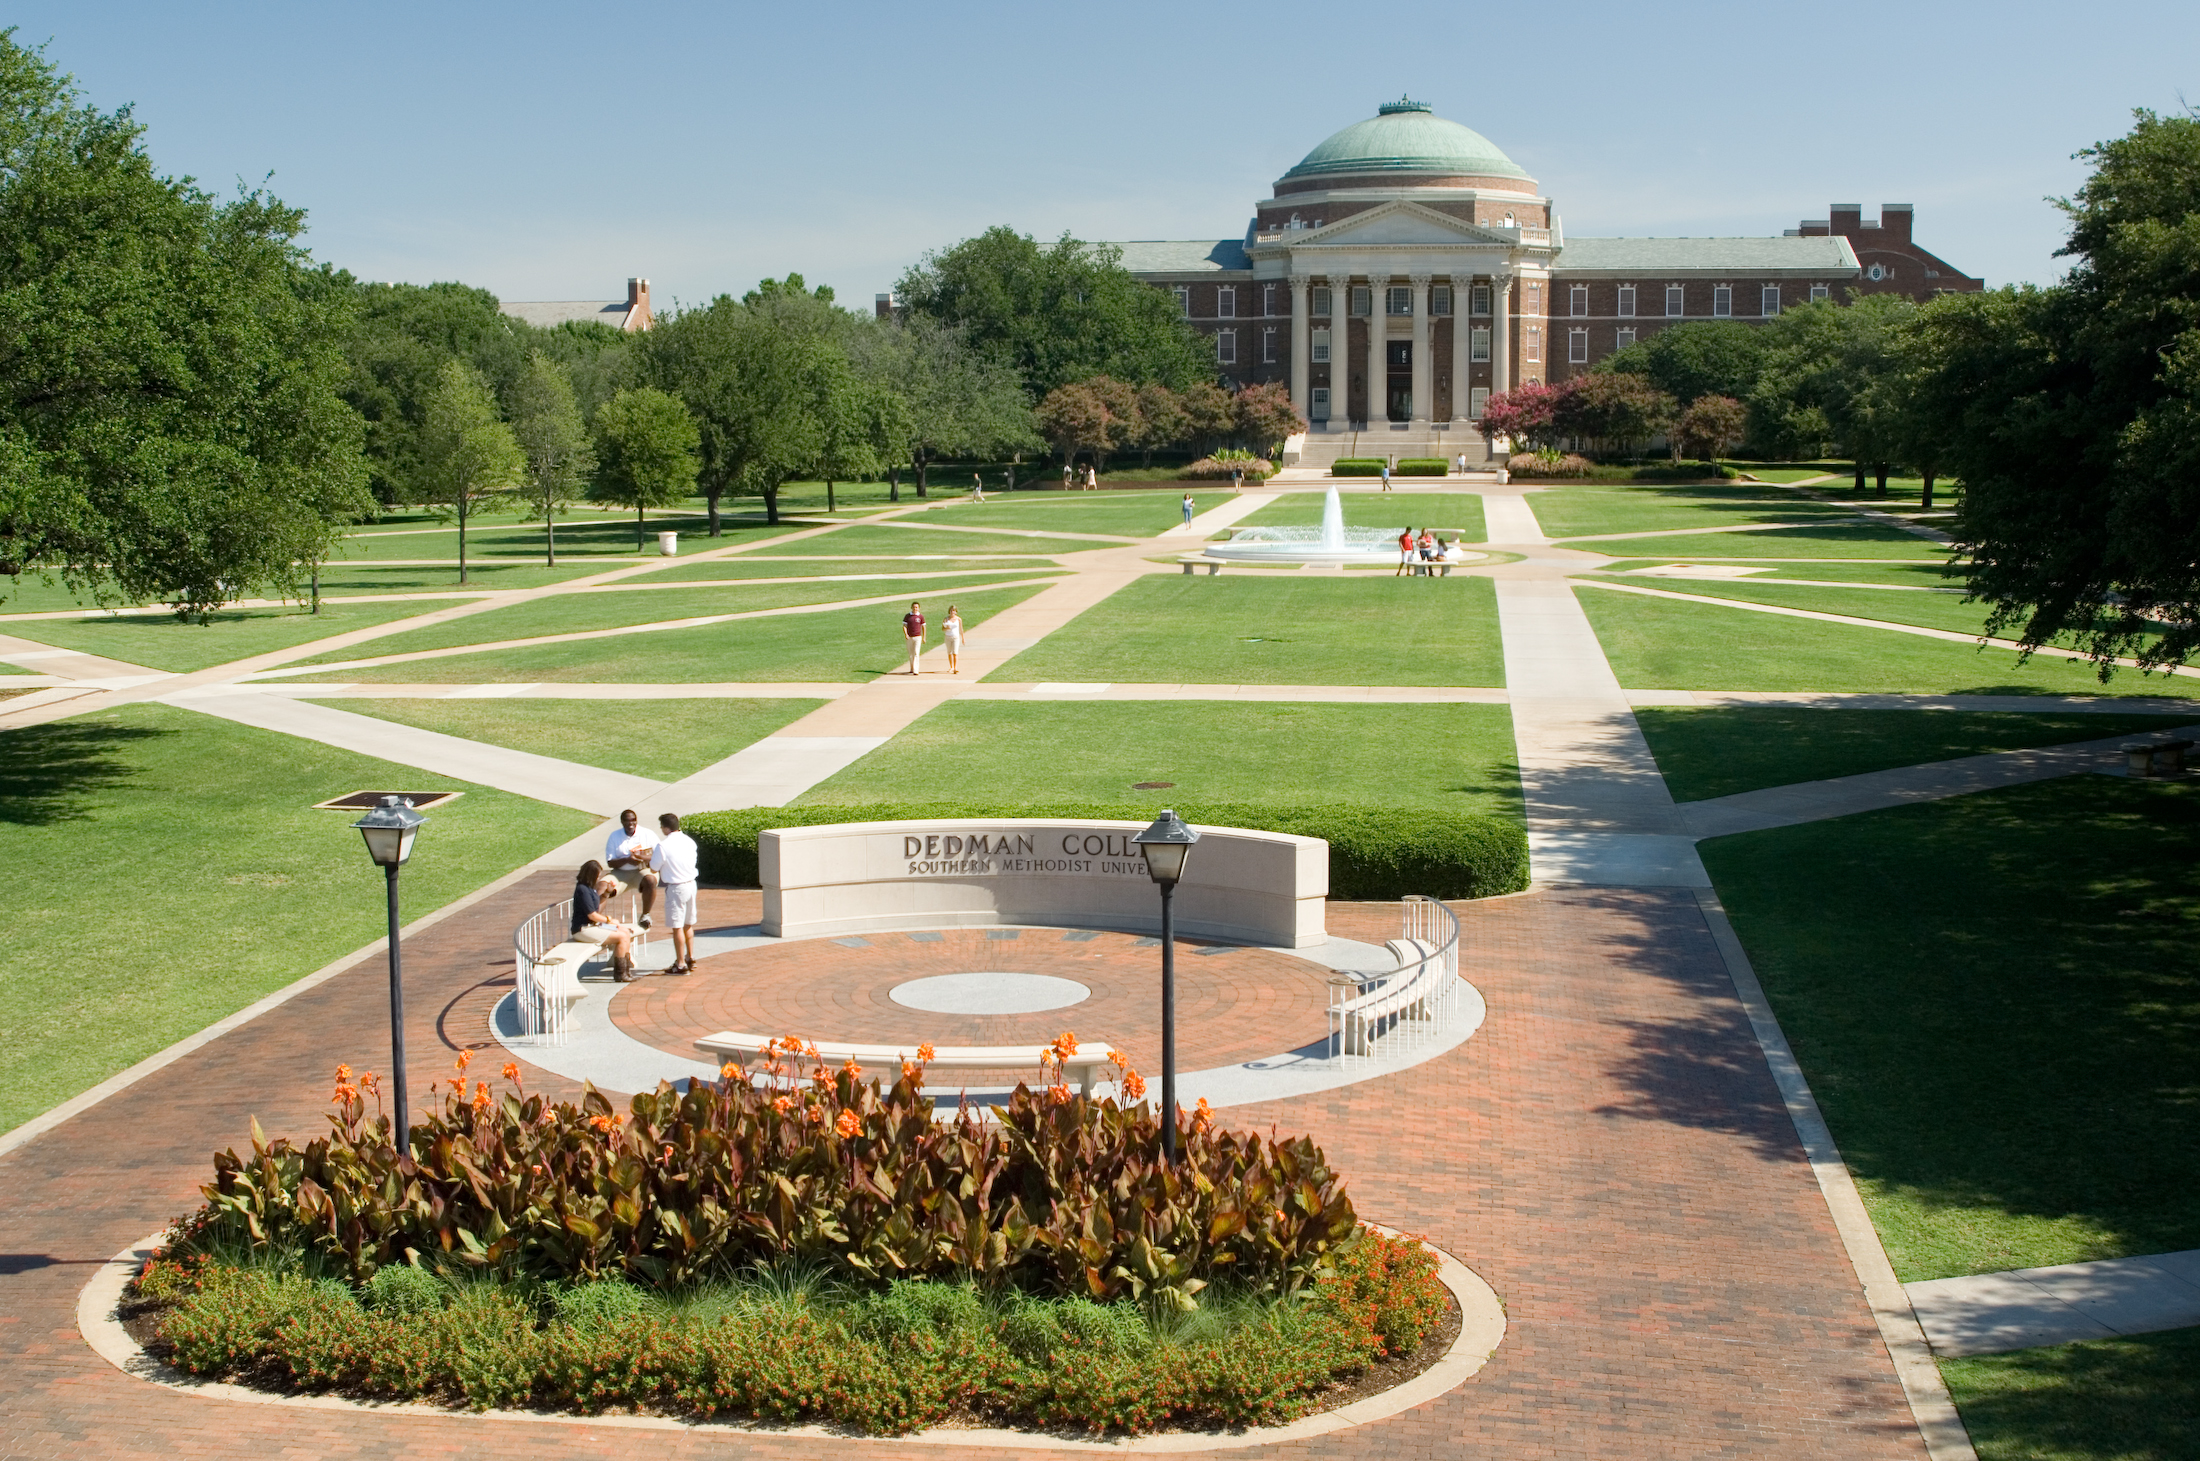 Dallas Hall, SMU's iconic building with a dome, symbolizes the university's classic Georgian style and intellectual tradition.